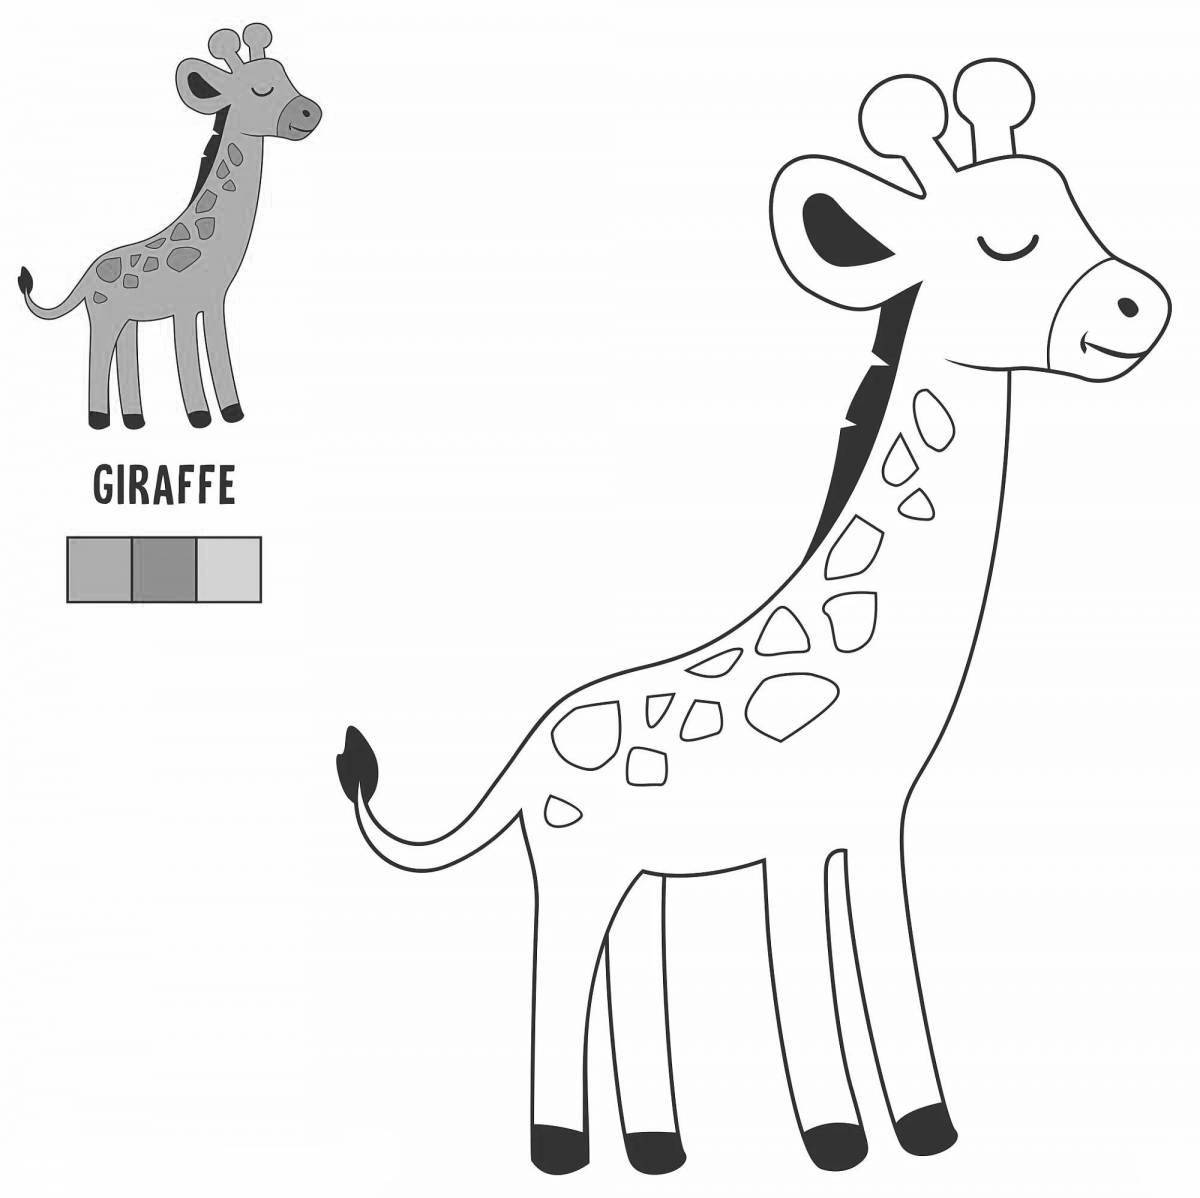 Outstanding giraffe coloring page for 4-5 year olds